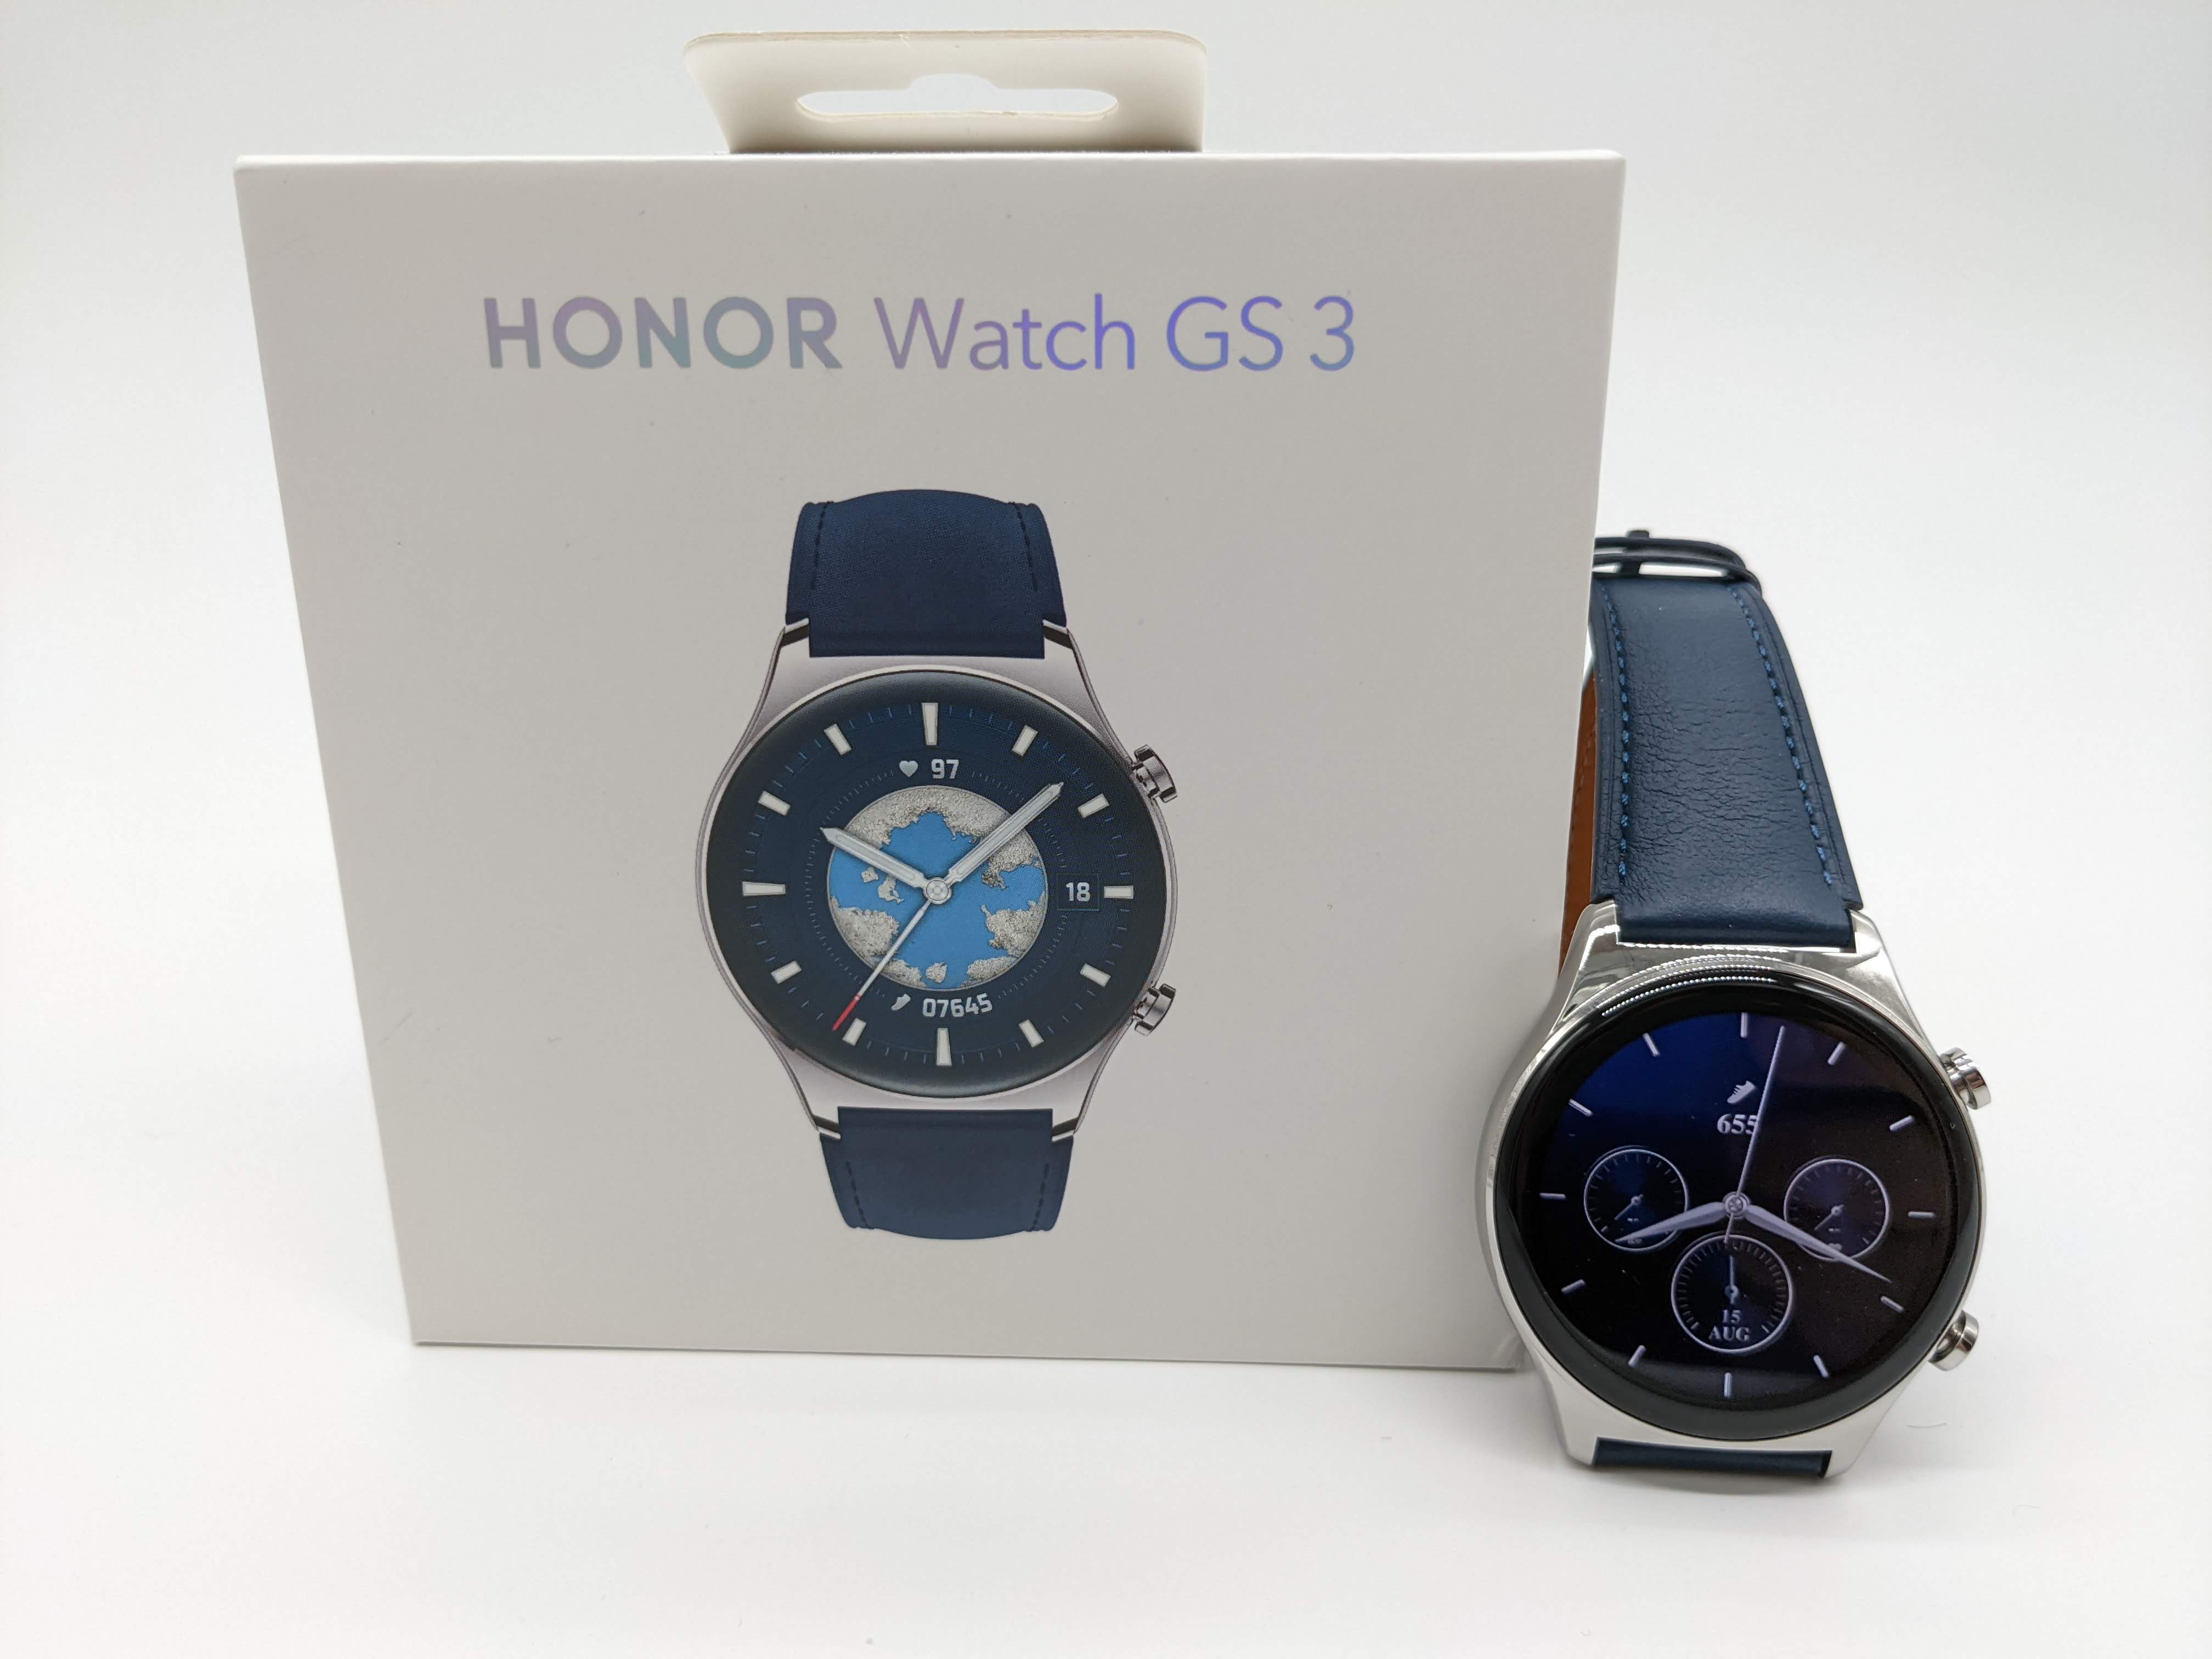 Honor Watch GS Pro Smartwatch Price in India - Buy Honor Watch GS Pro  Smartwatch online at Flipkart.com